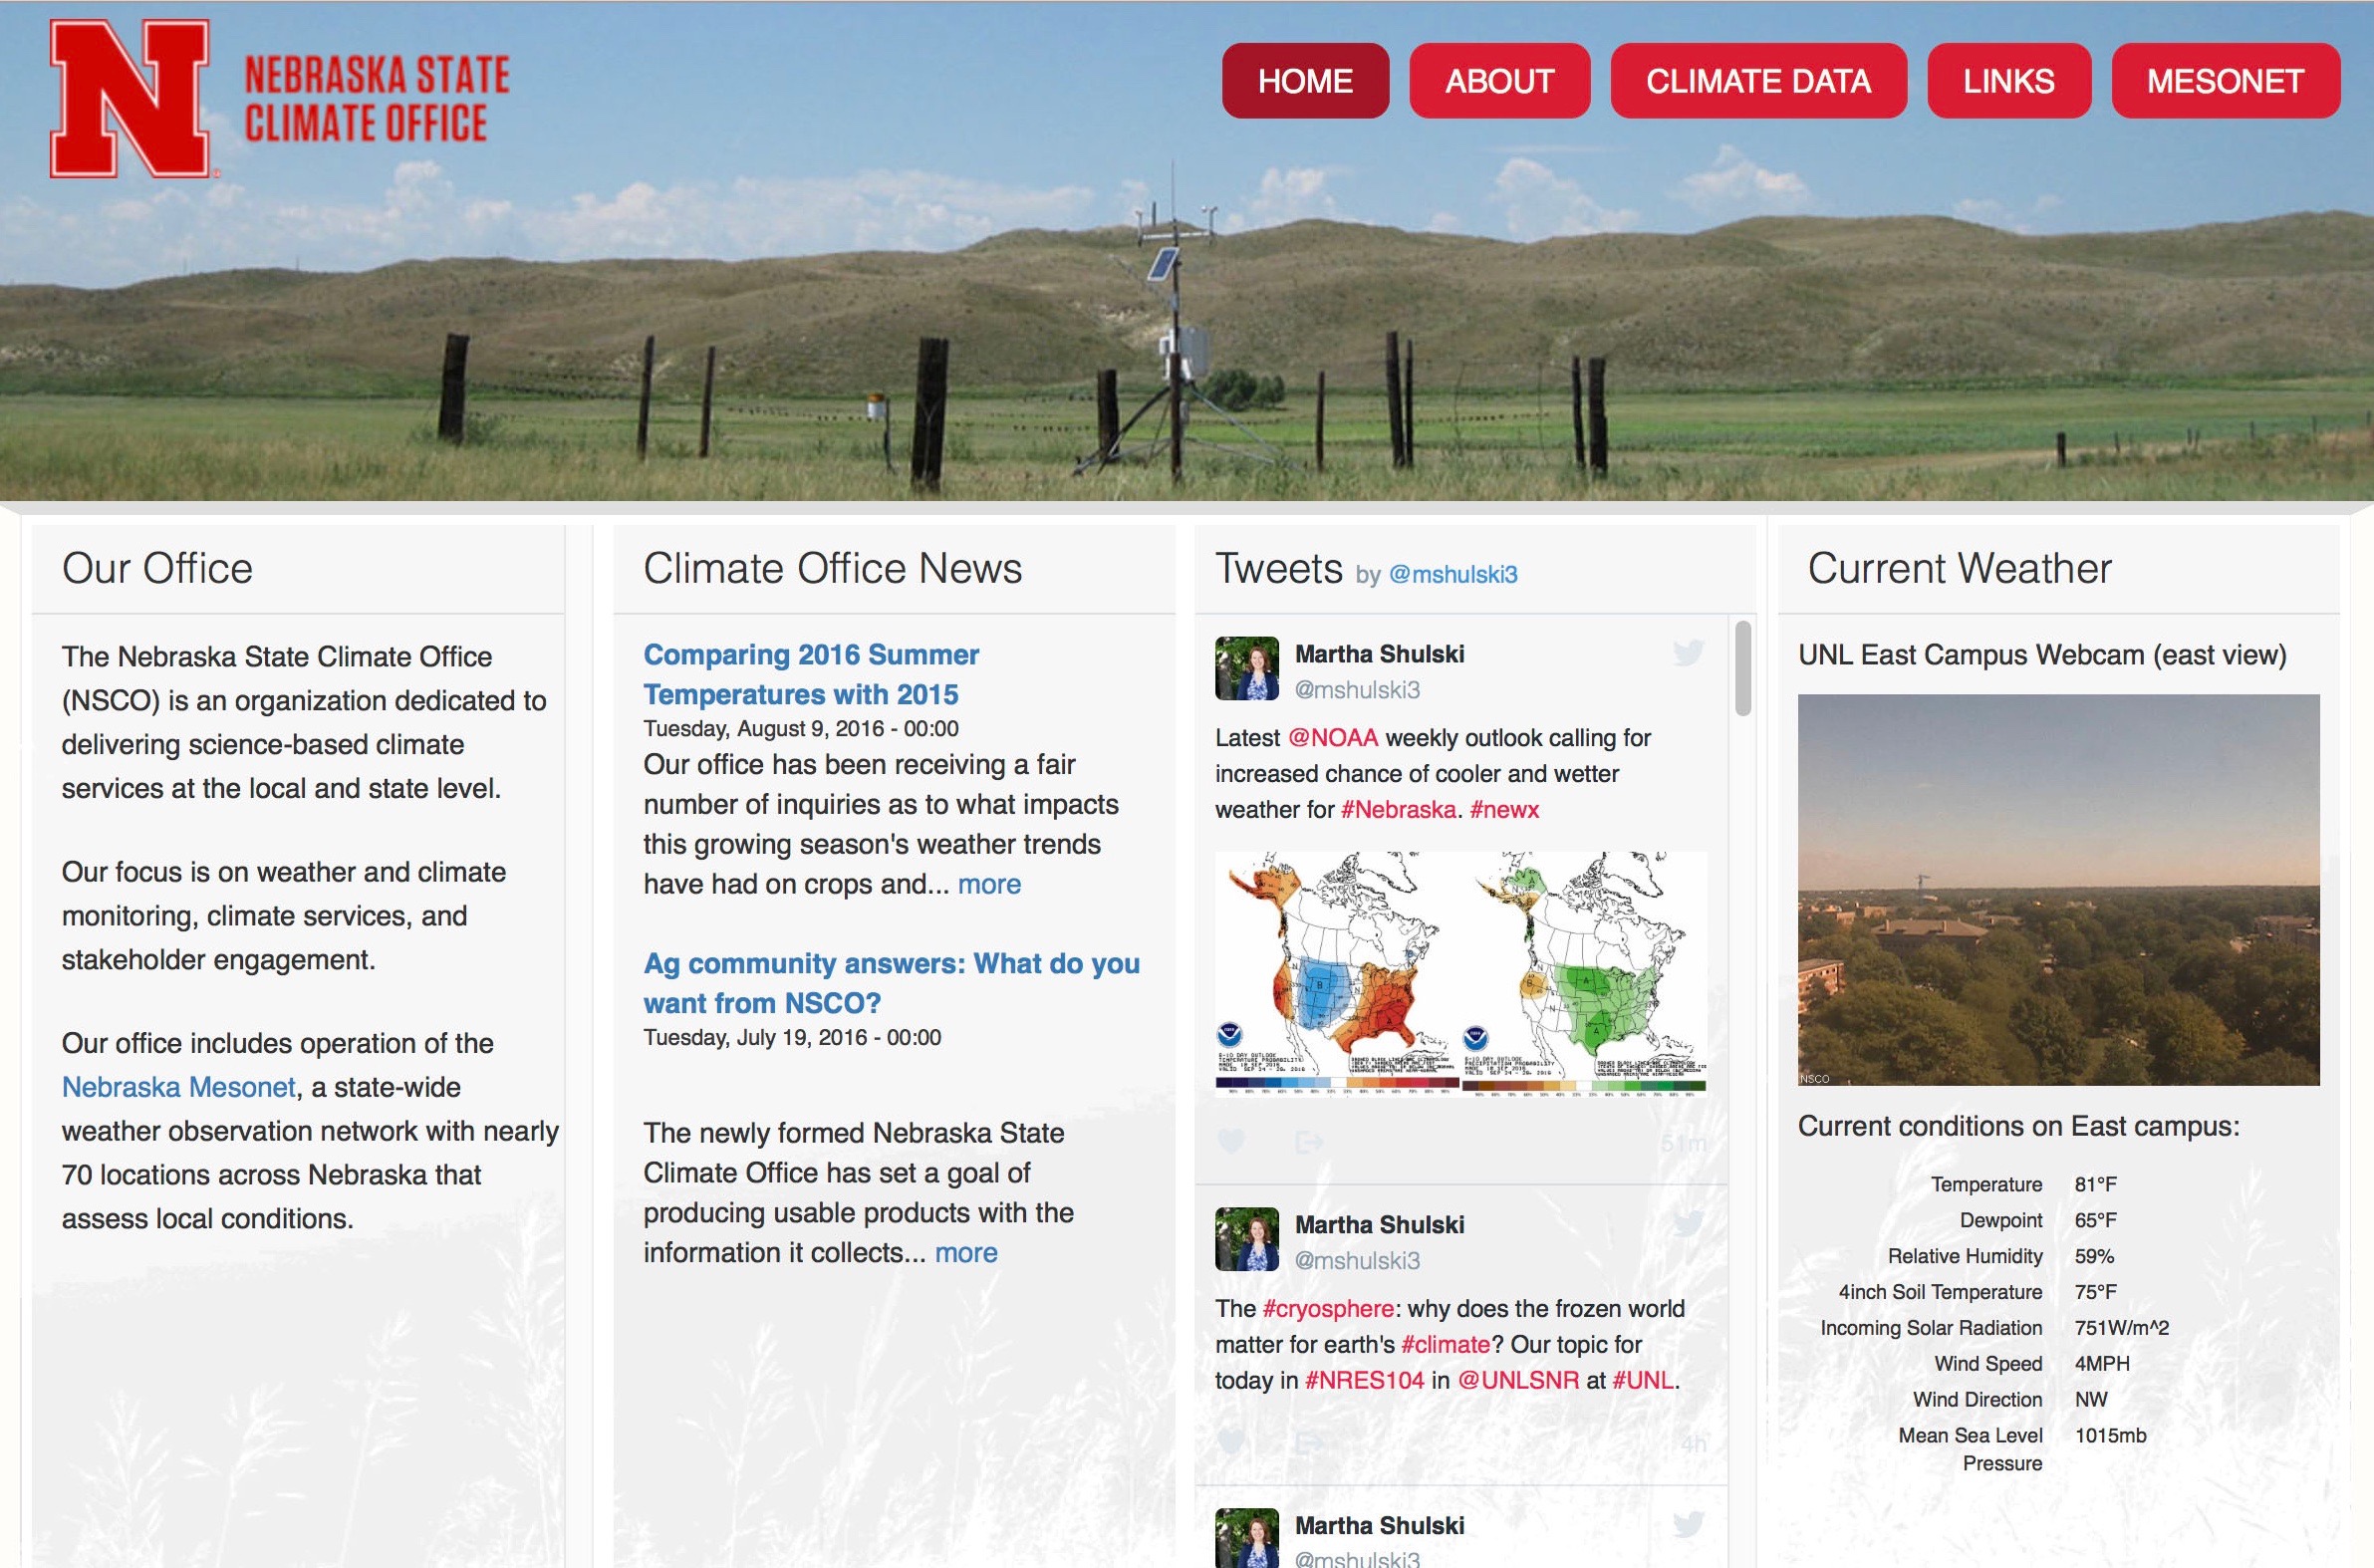 The Nebraska State Climate Office launched its website, as well as that of the Nebraska Mesonet.